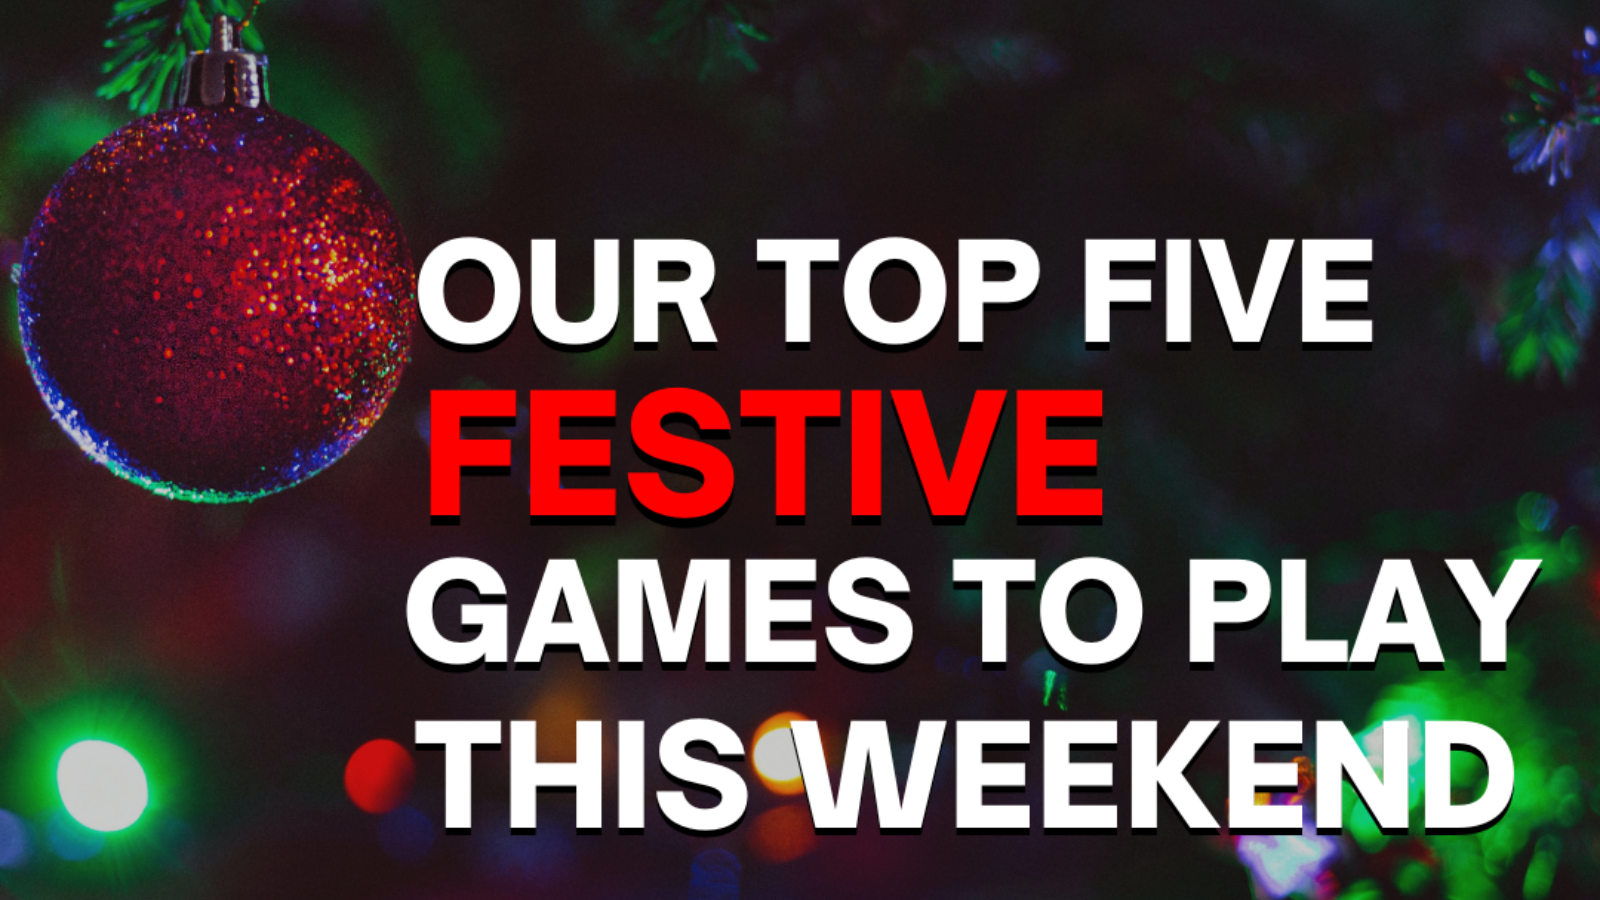 Our Top Five Festive Games to Play This Weekend!